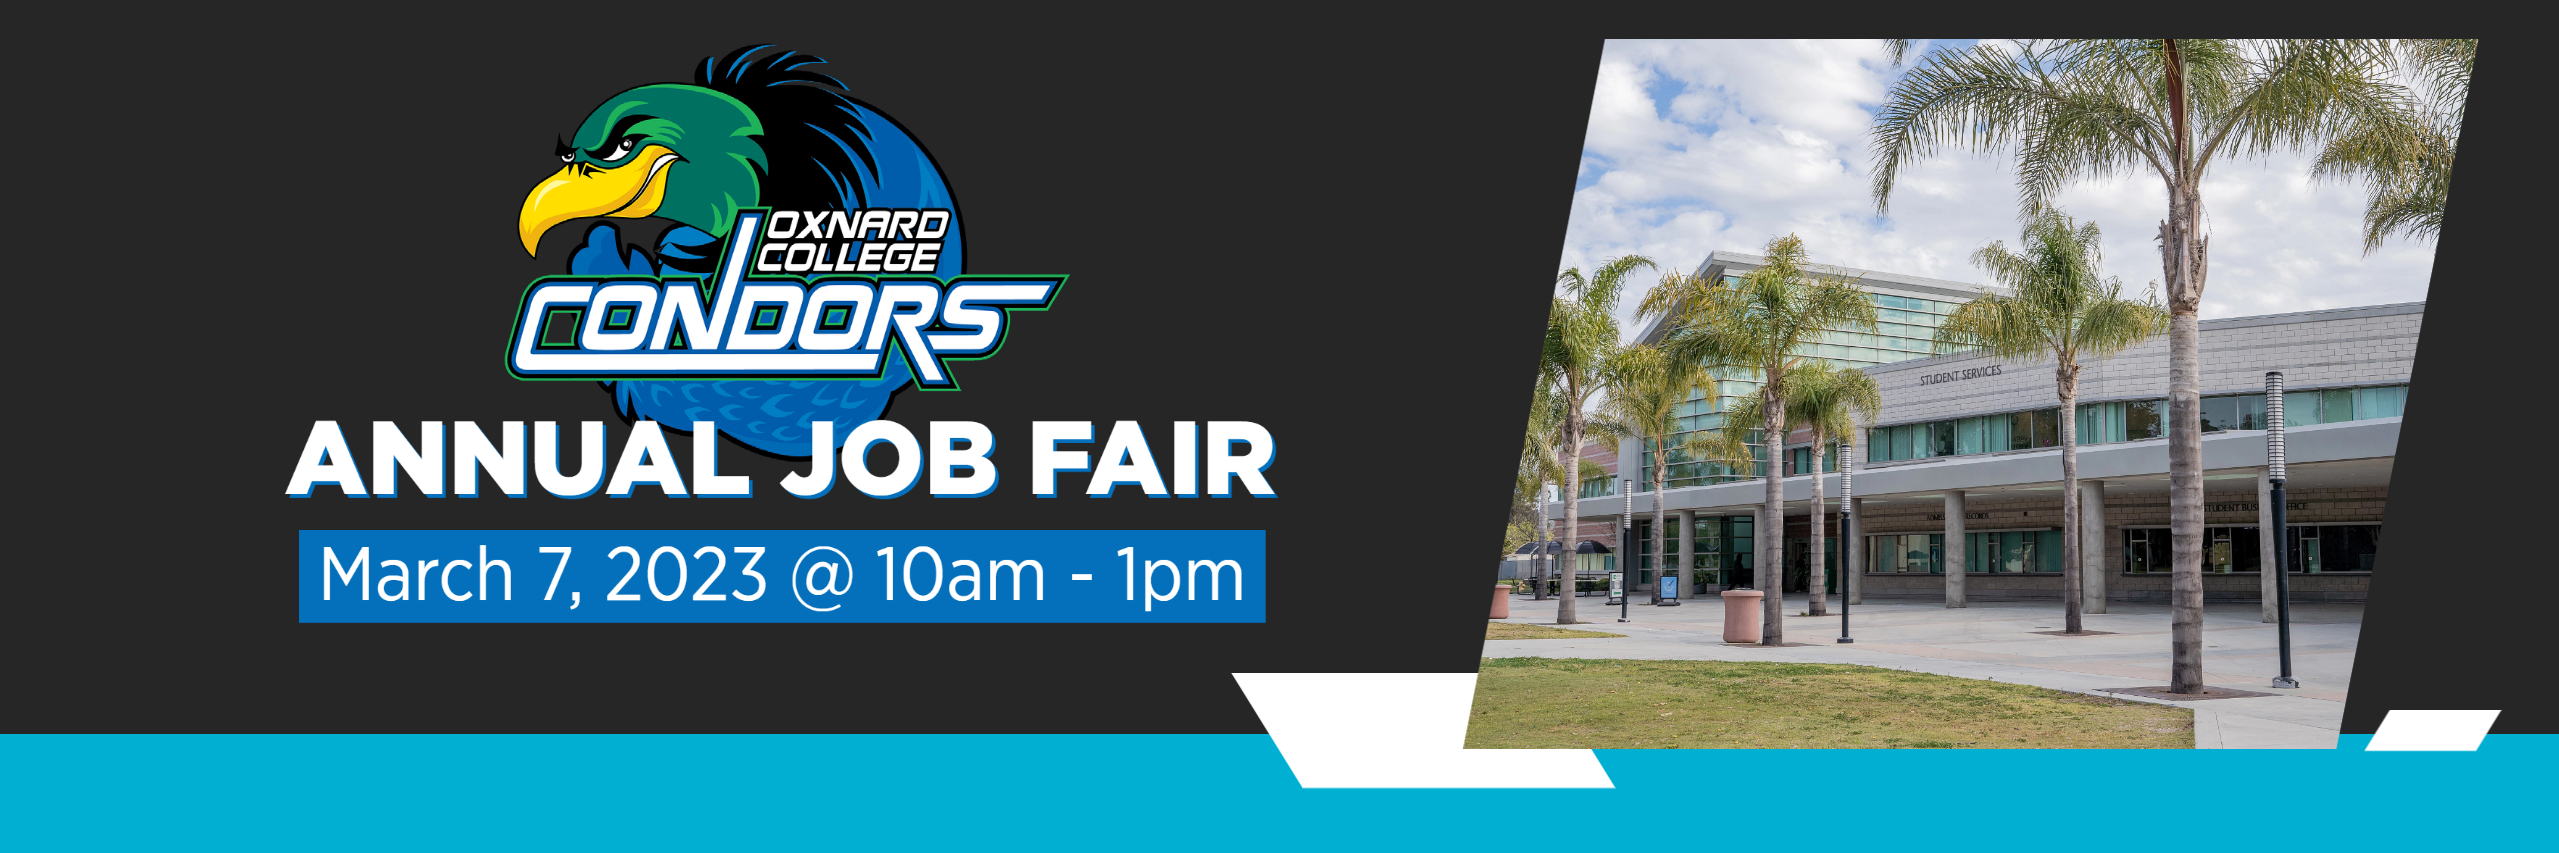 text reads: Annual Job Fair March 7, 2023 @ 10am - 1pm with Oxnard College Condors logo on black background. Image of Student Services Building on right side of hero banner image.